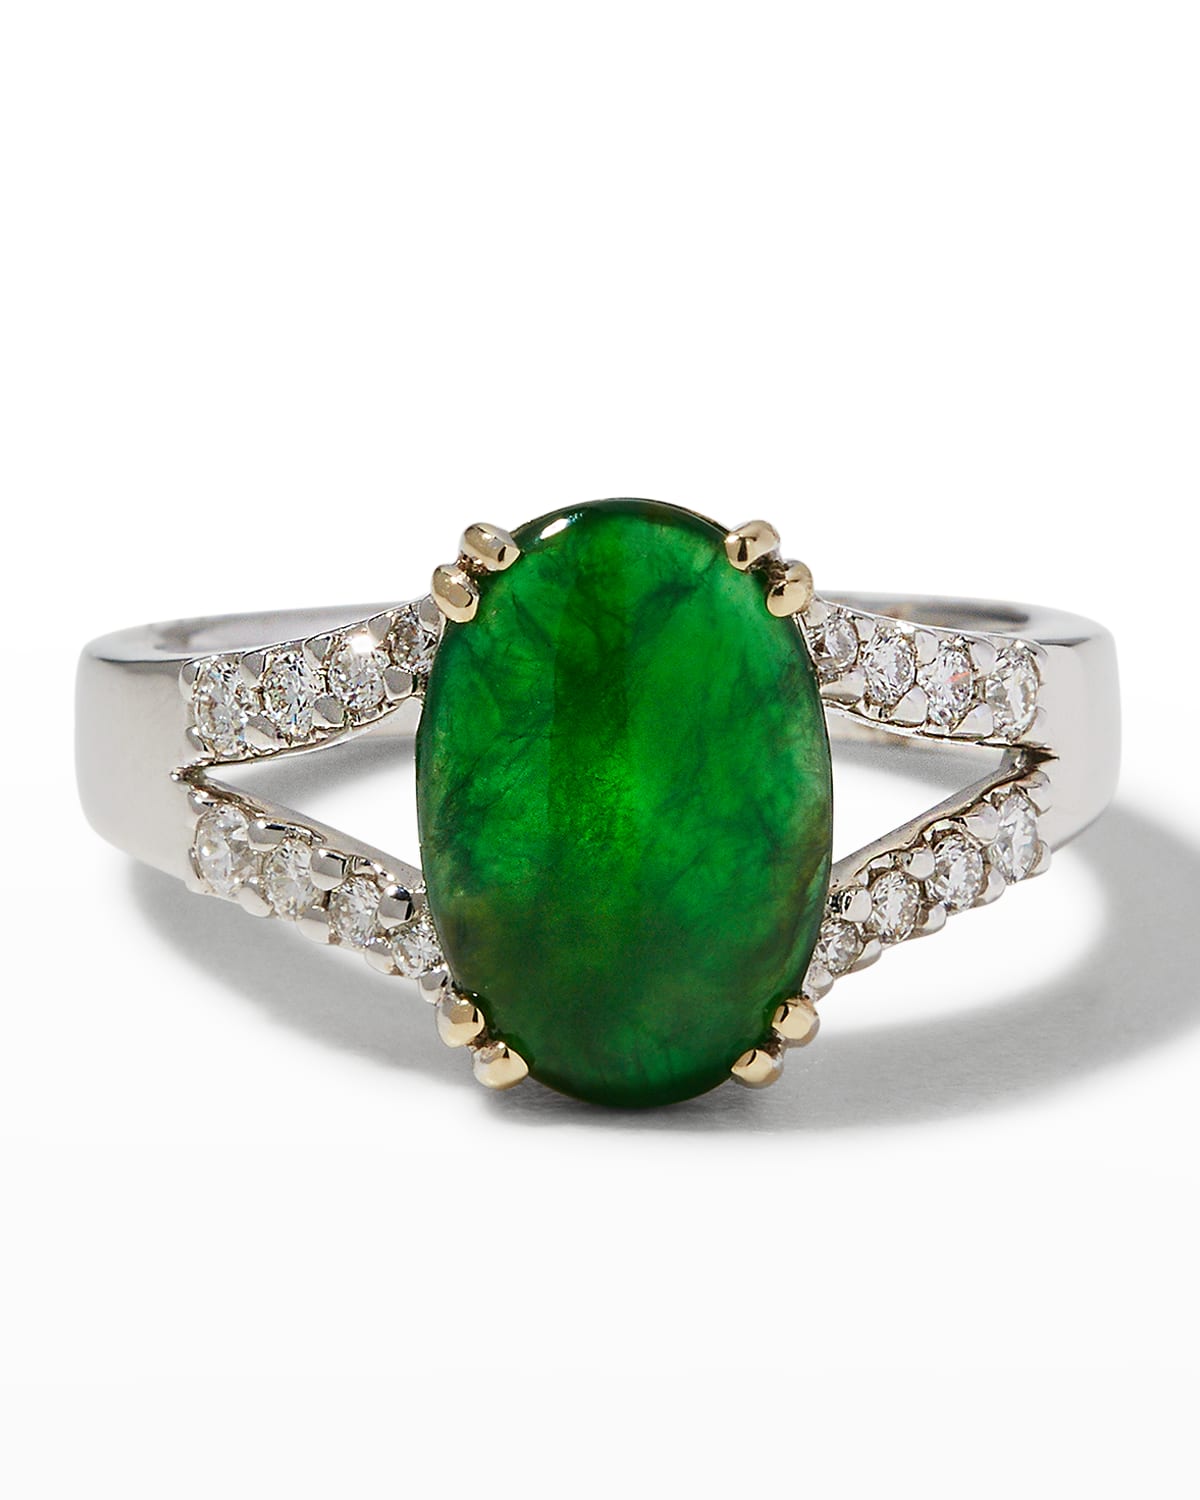 David C.A. Lin Intense Green Jade Oval Ring in White Gold and Diamond